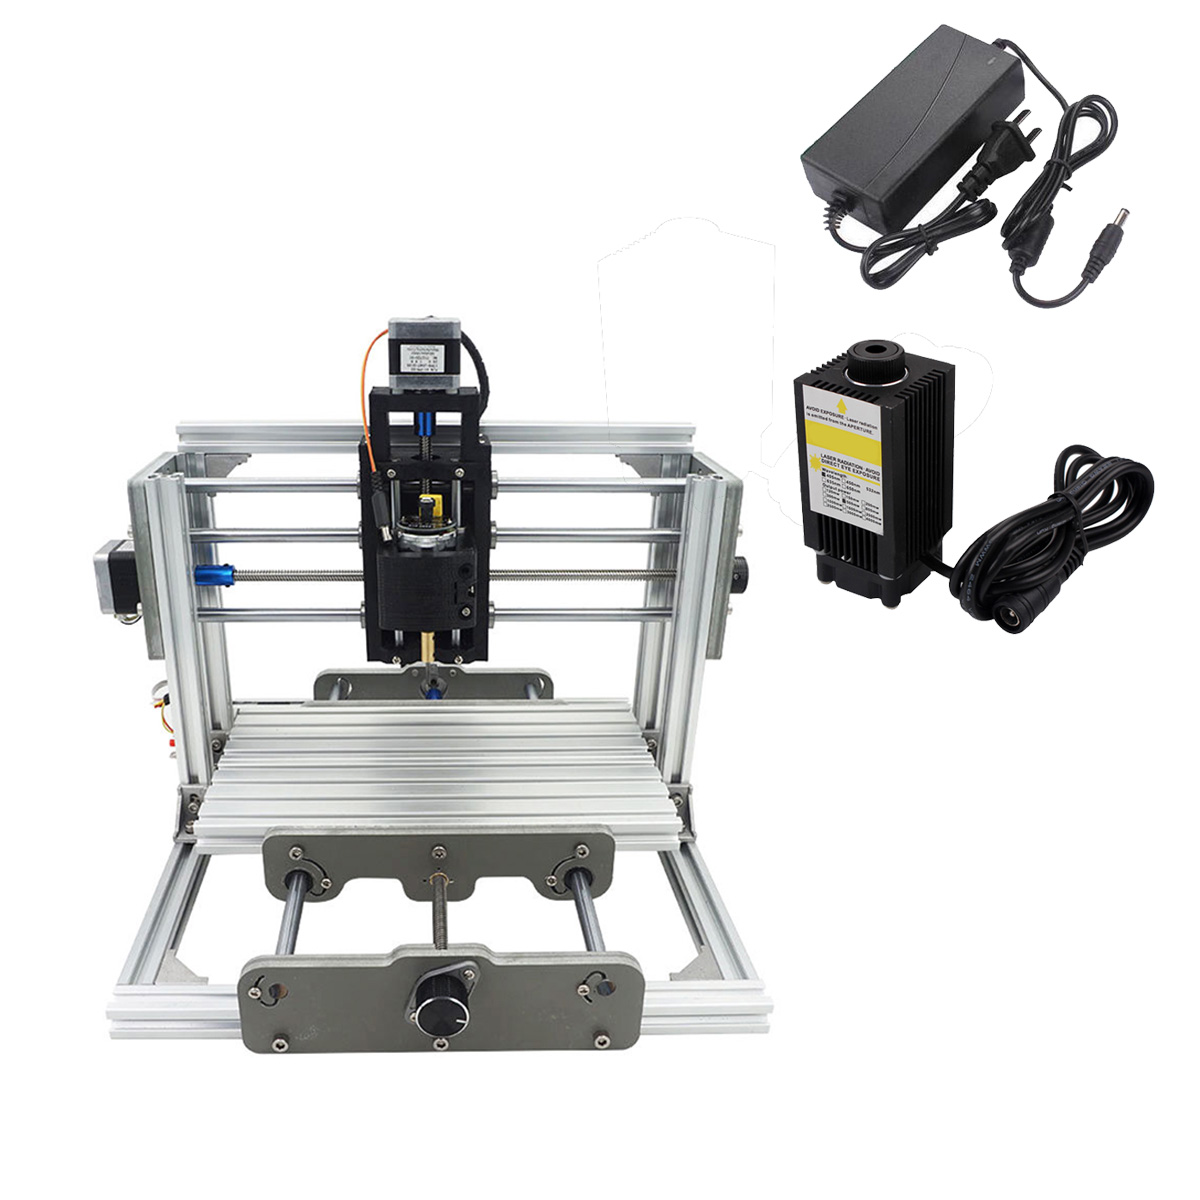 

2417 3 Axis Mini DIY CNC Router Wood Craving Milling Engraver Machine with 500mW Laser Module